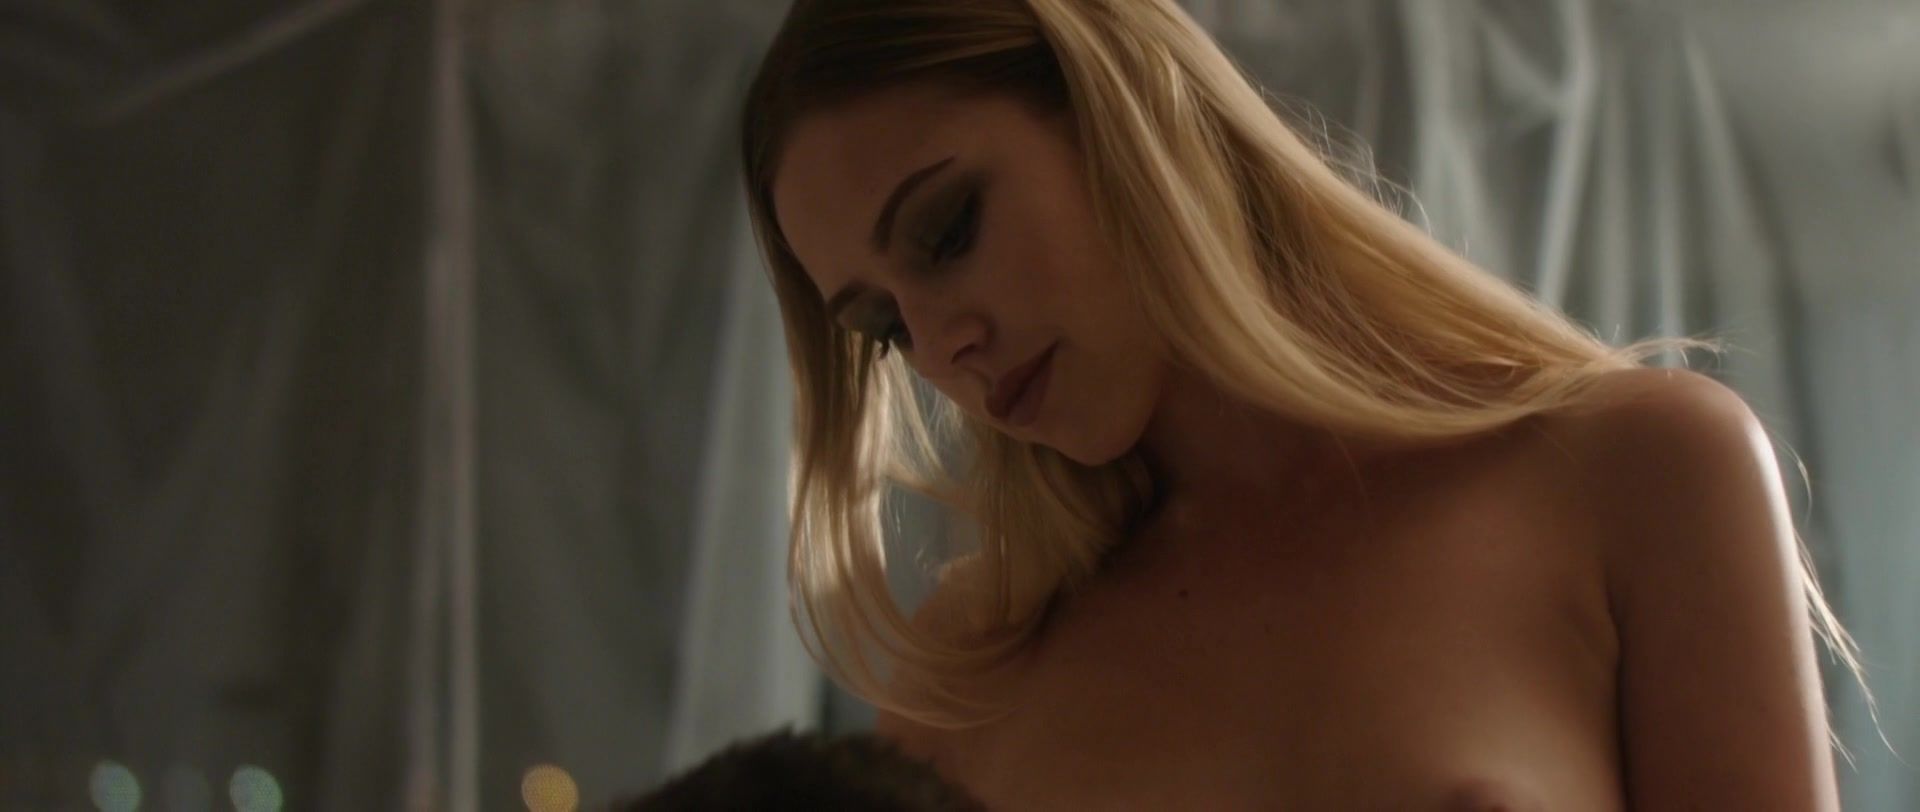 Girlongirl Jessica Norris nude - Outlawed (2018) Movies